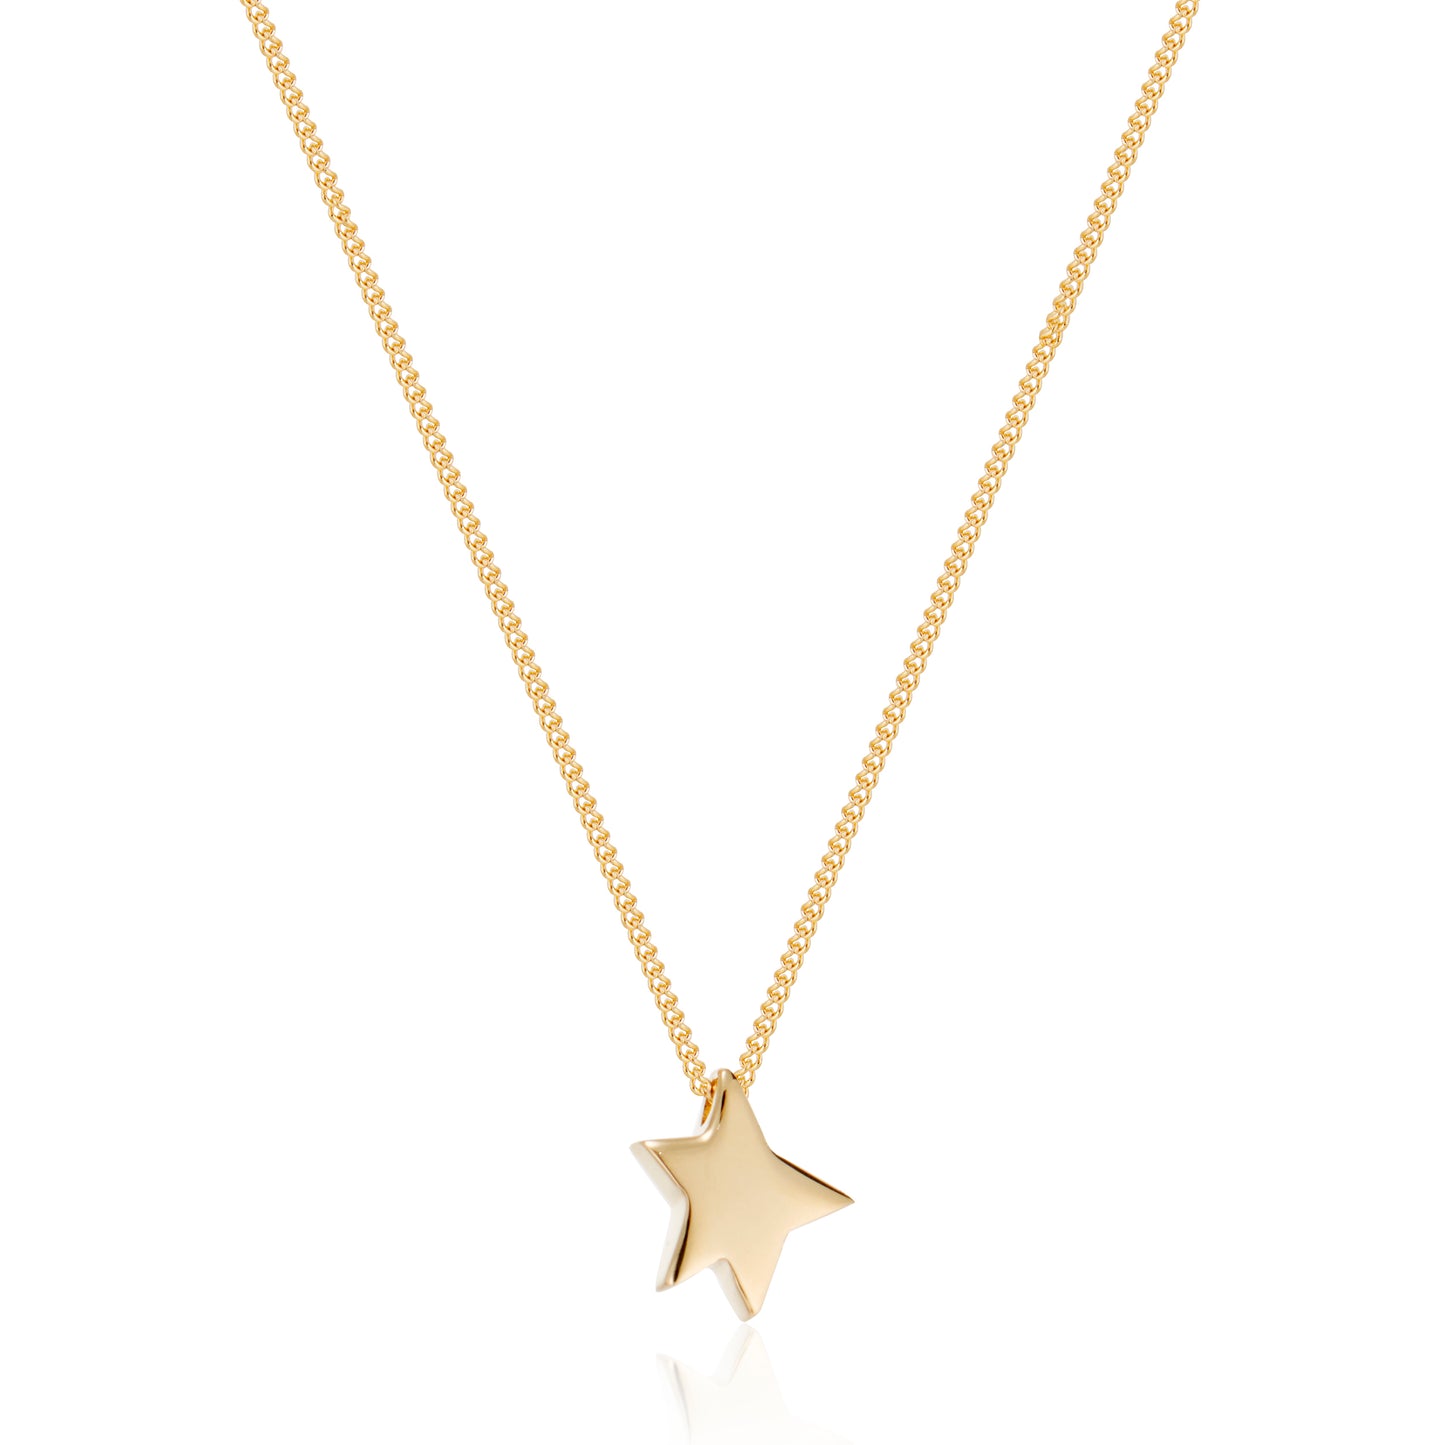 Étoile Mini Star Necklace  from Serena Van Rensselaer x Le Petit Prince© Collection